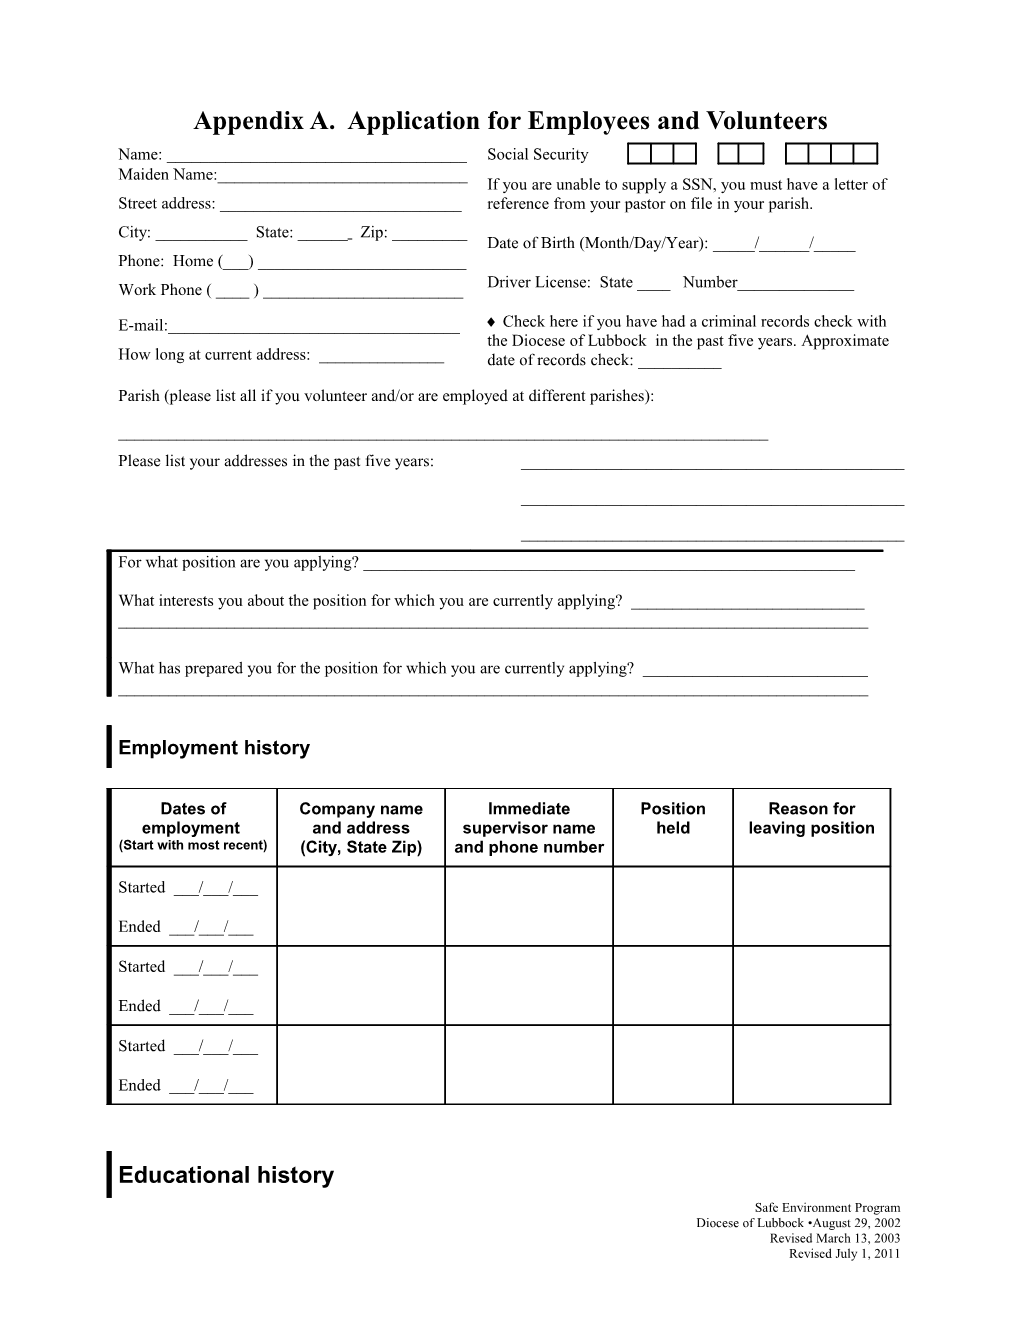 Appendix A. Application for Employees and Volunteers